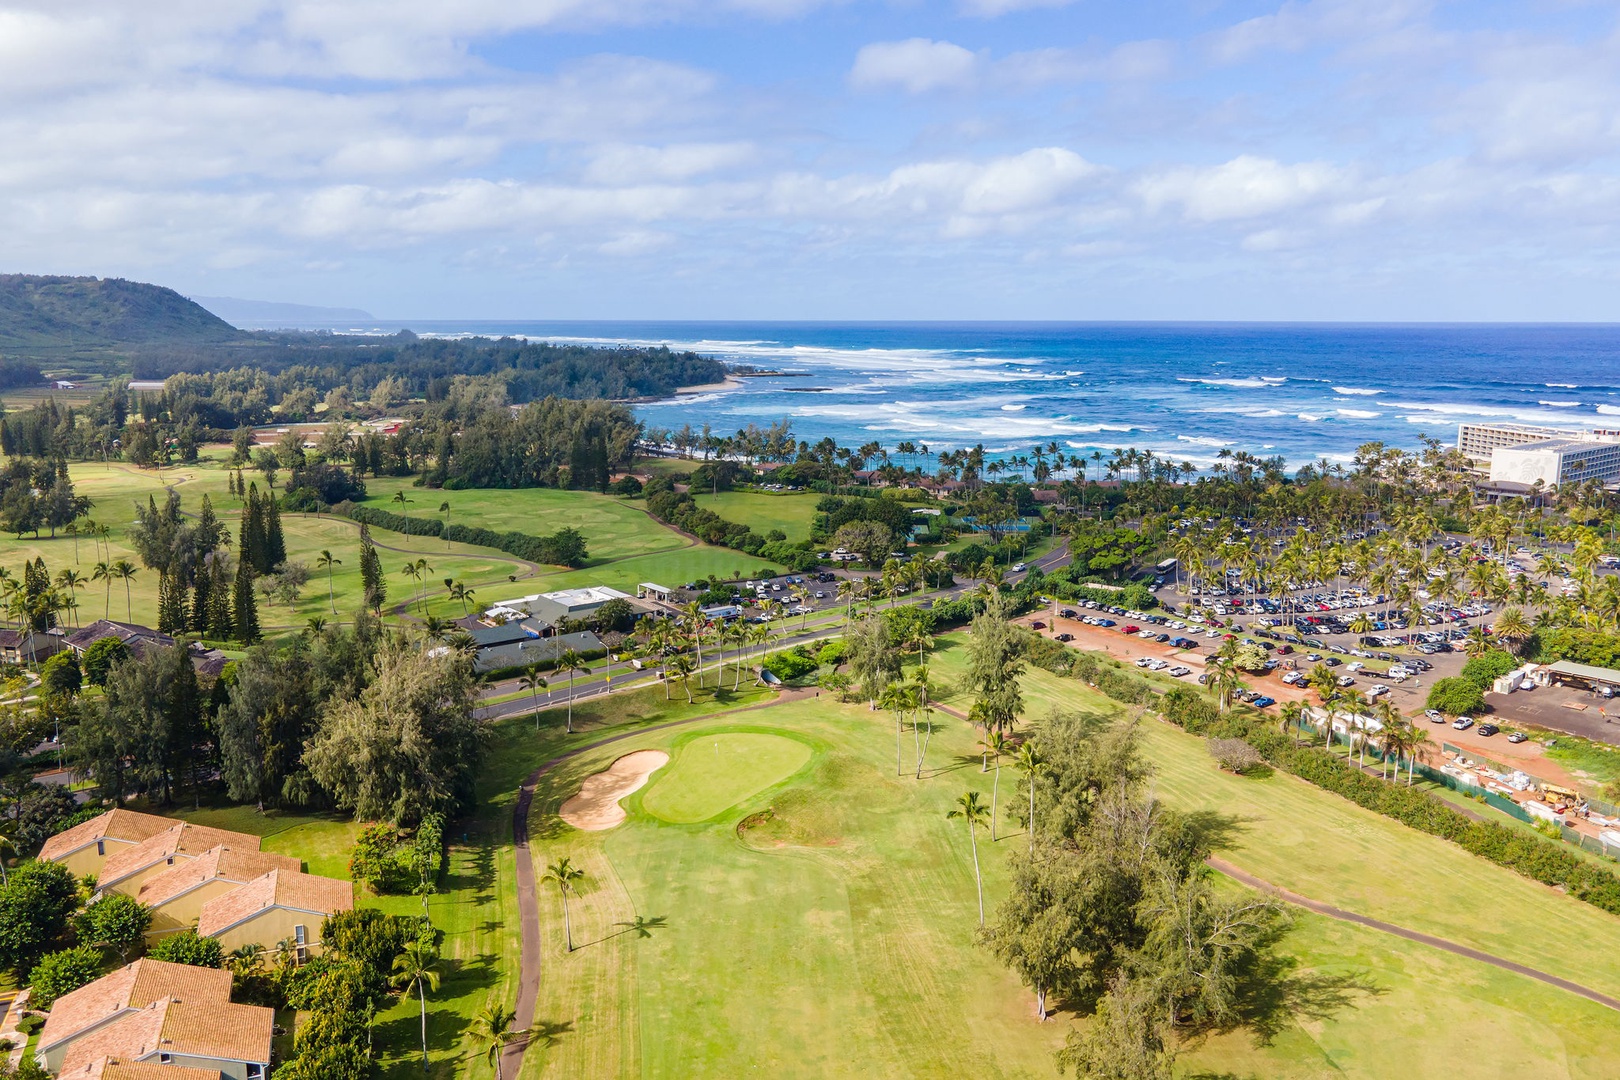 Kahuku Vacation Rentals, Kuilima Estates East #164 - View of 18th Hole at George Fazio Golf Course